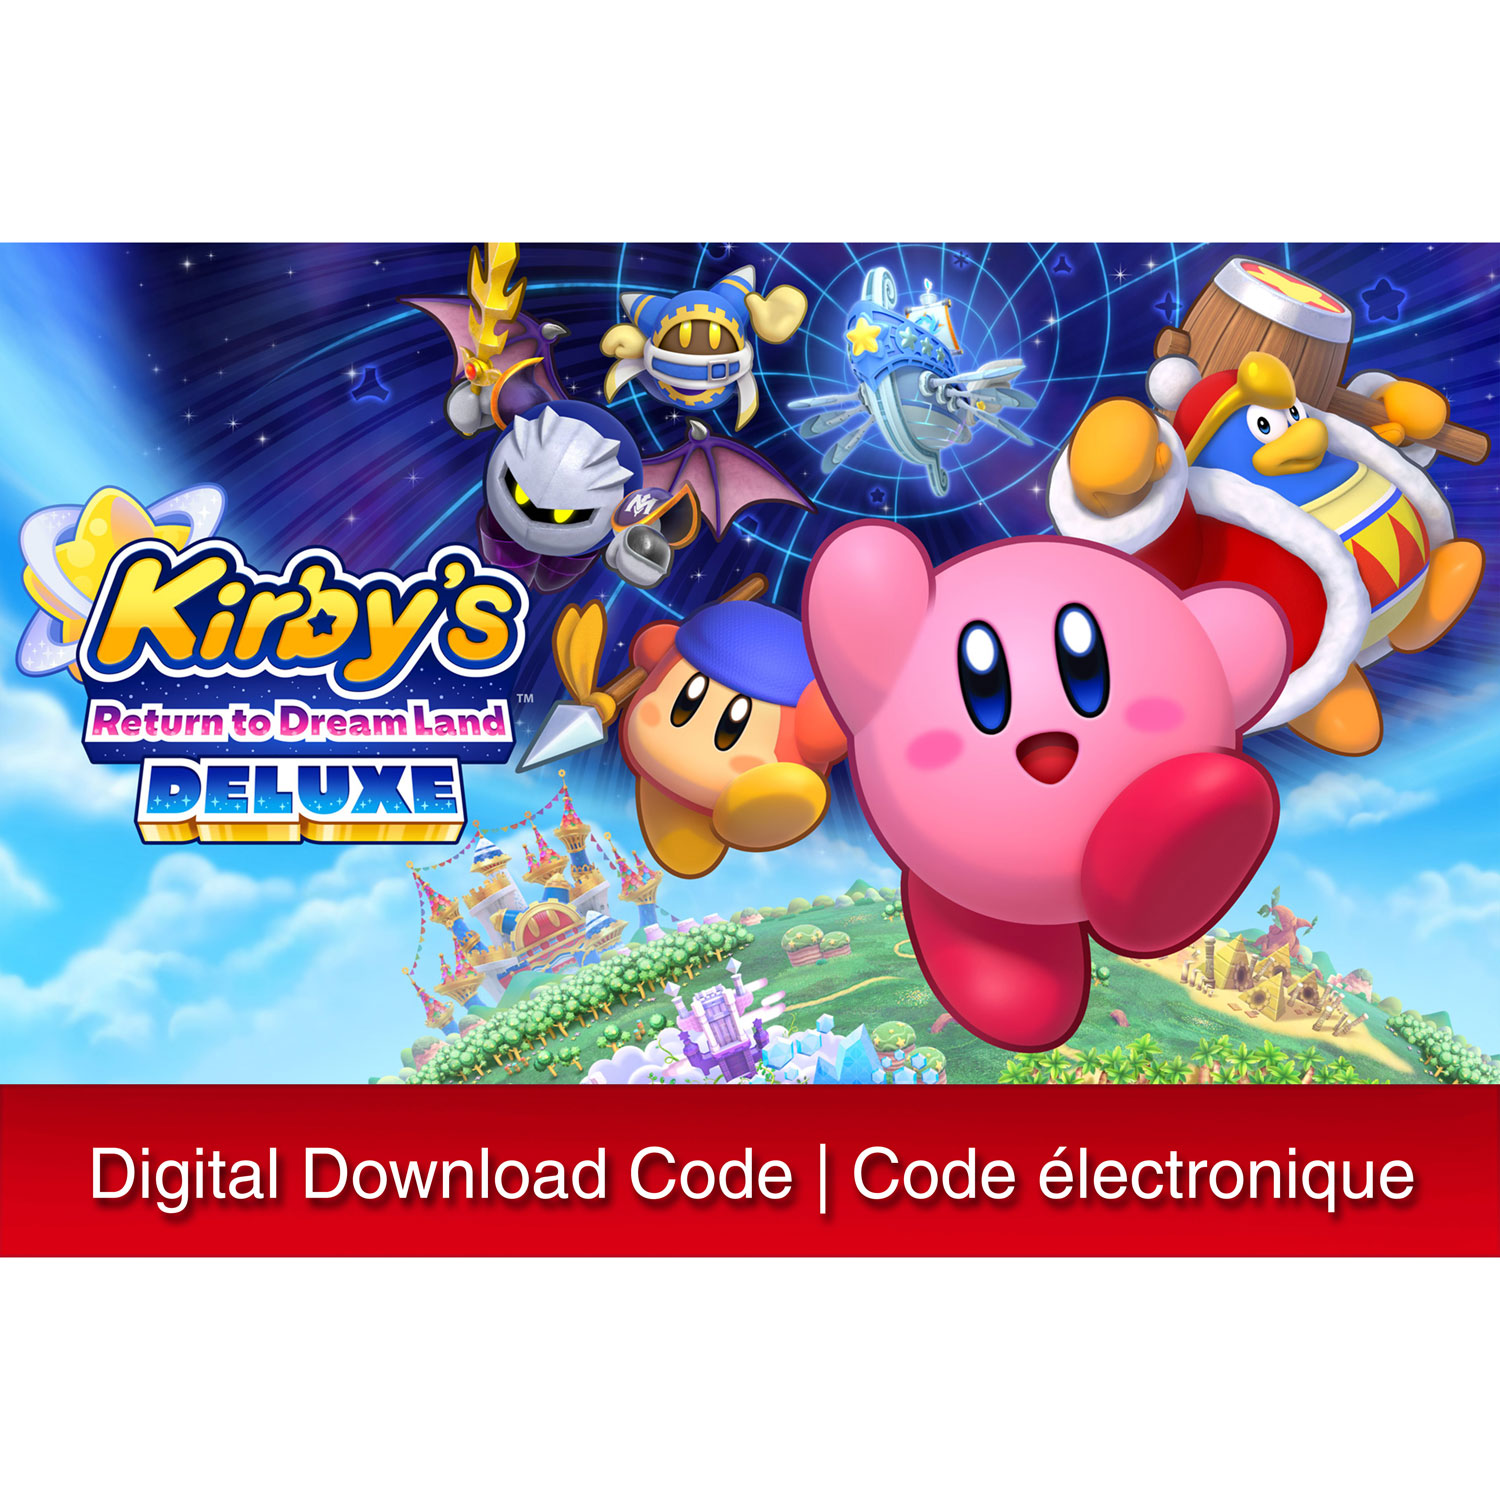 Kirby's Return to DreamLand Deluxe (Switch) - Digital Download